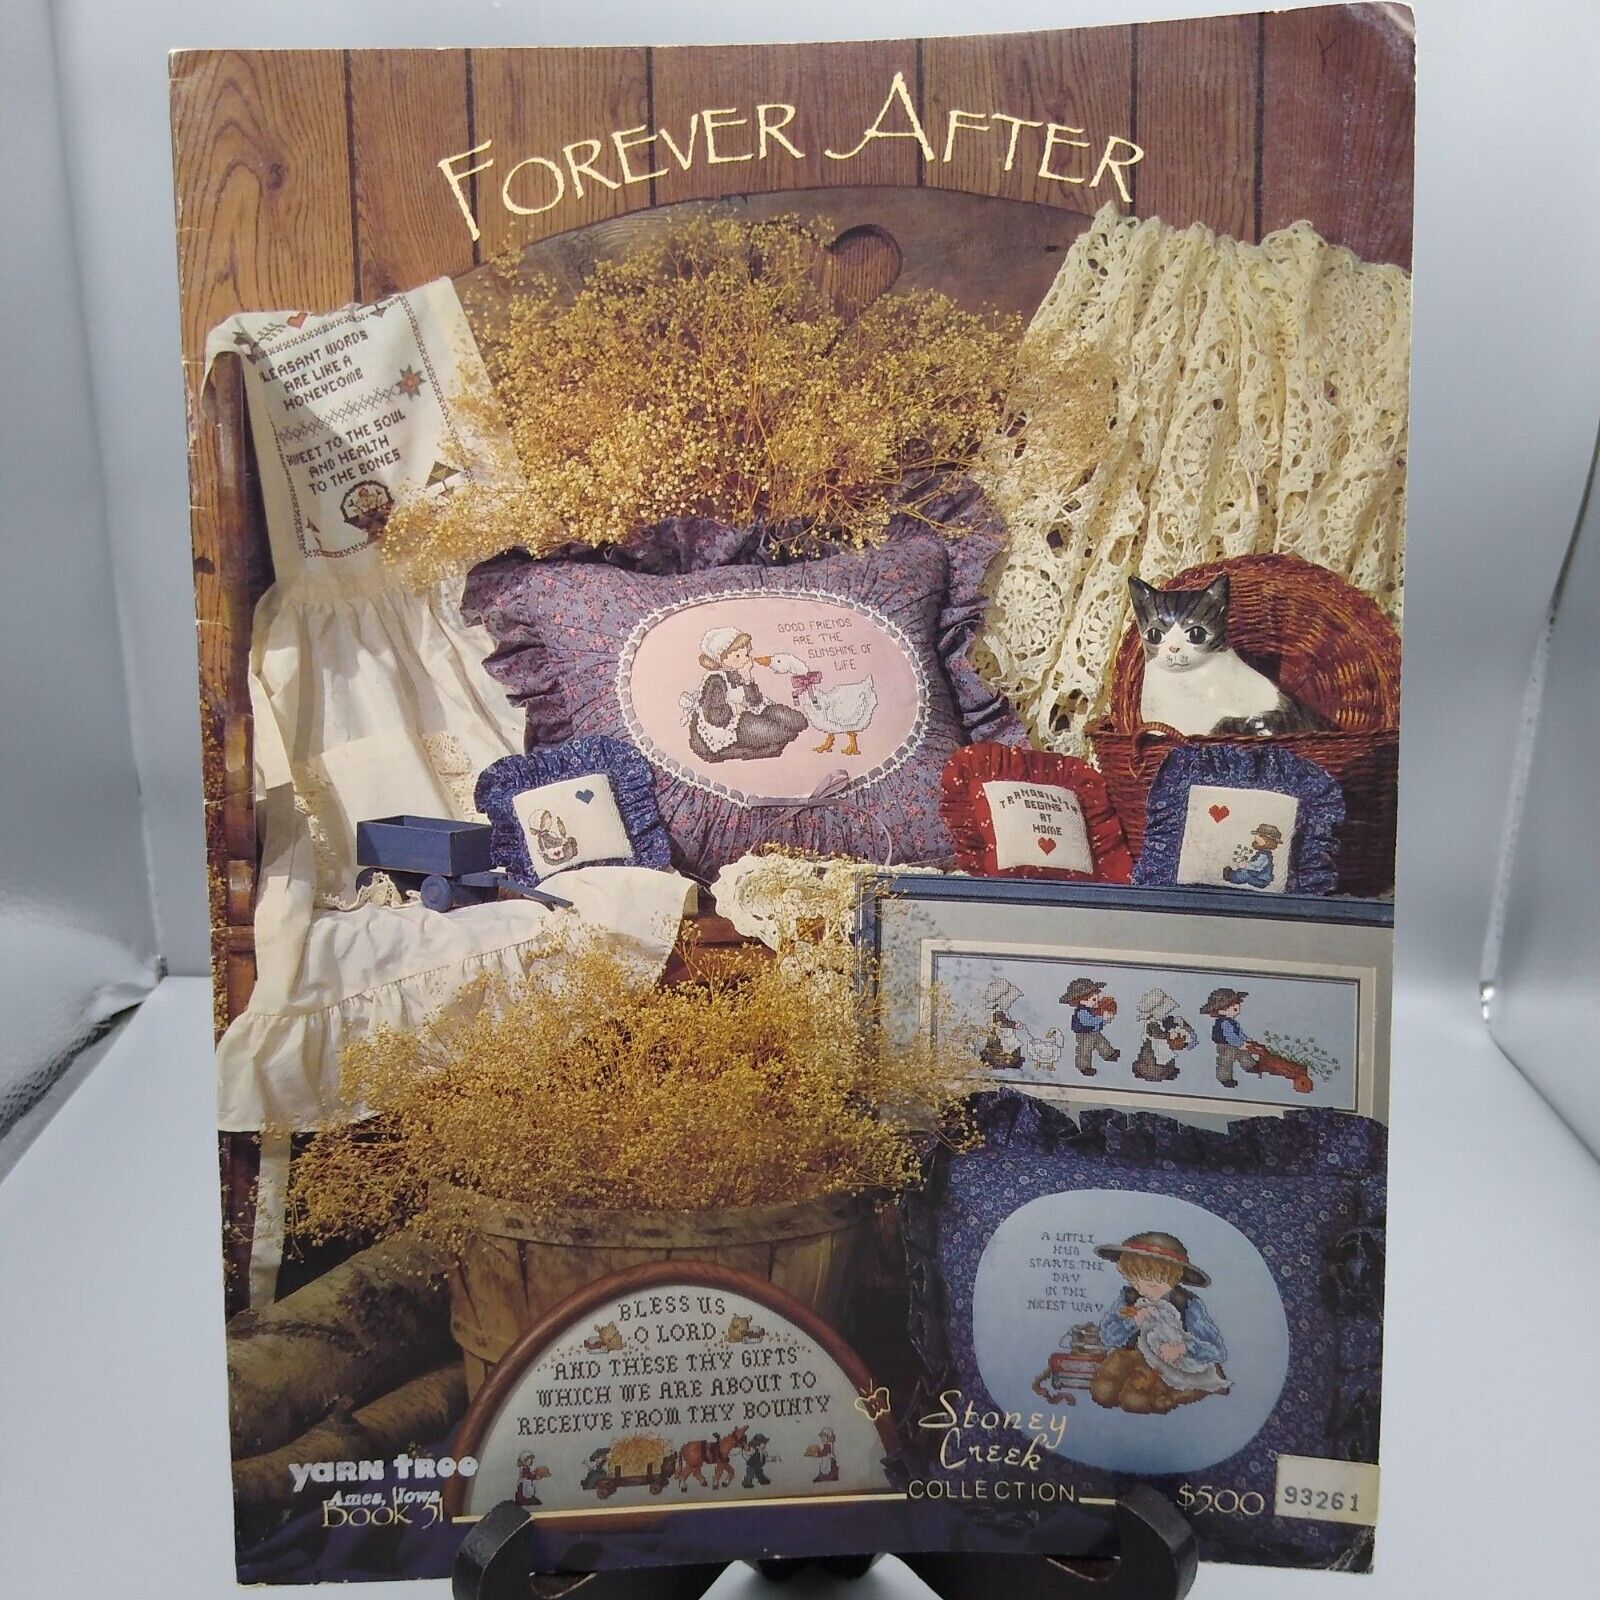 Vintage Cross Stitch Patterns, Forever After, 1986 Stoney Creek Collection Book - $7.85